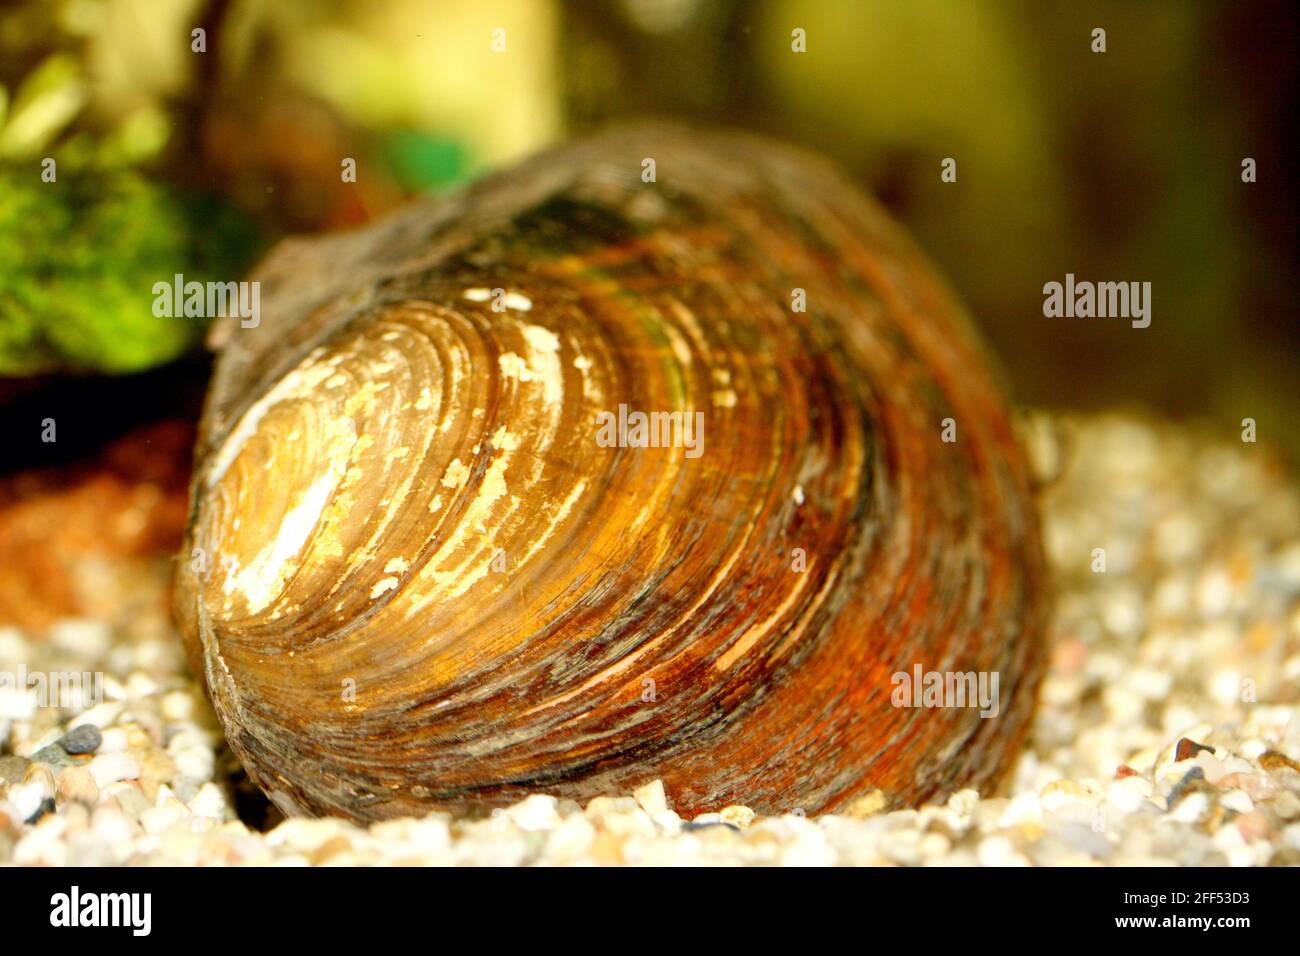 The Mussel (Anodontinae) a mollusk living at the bottom of the pond Stock Photo